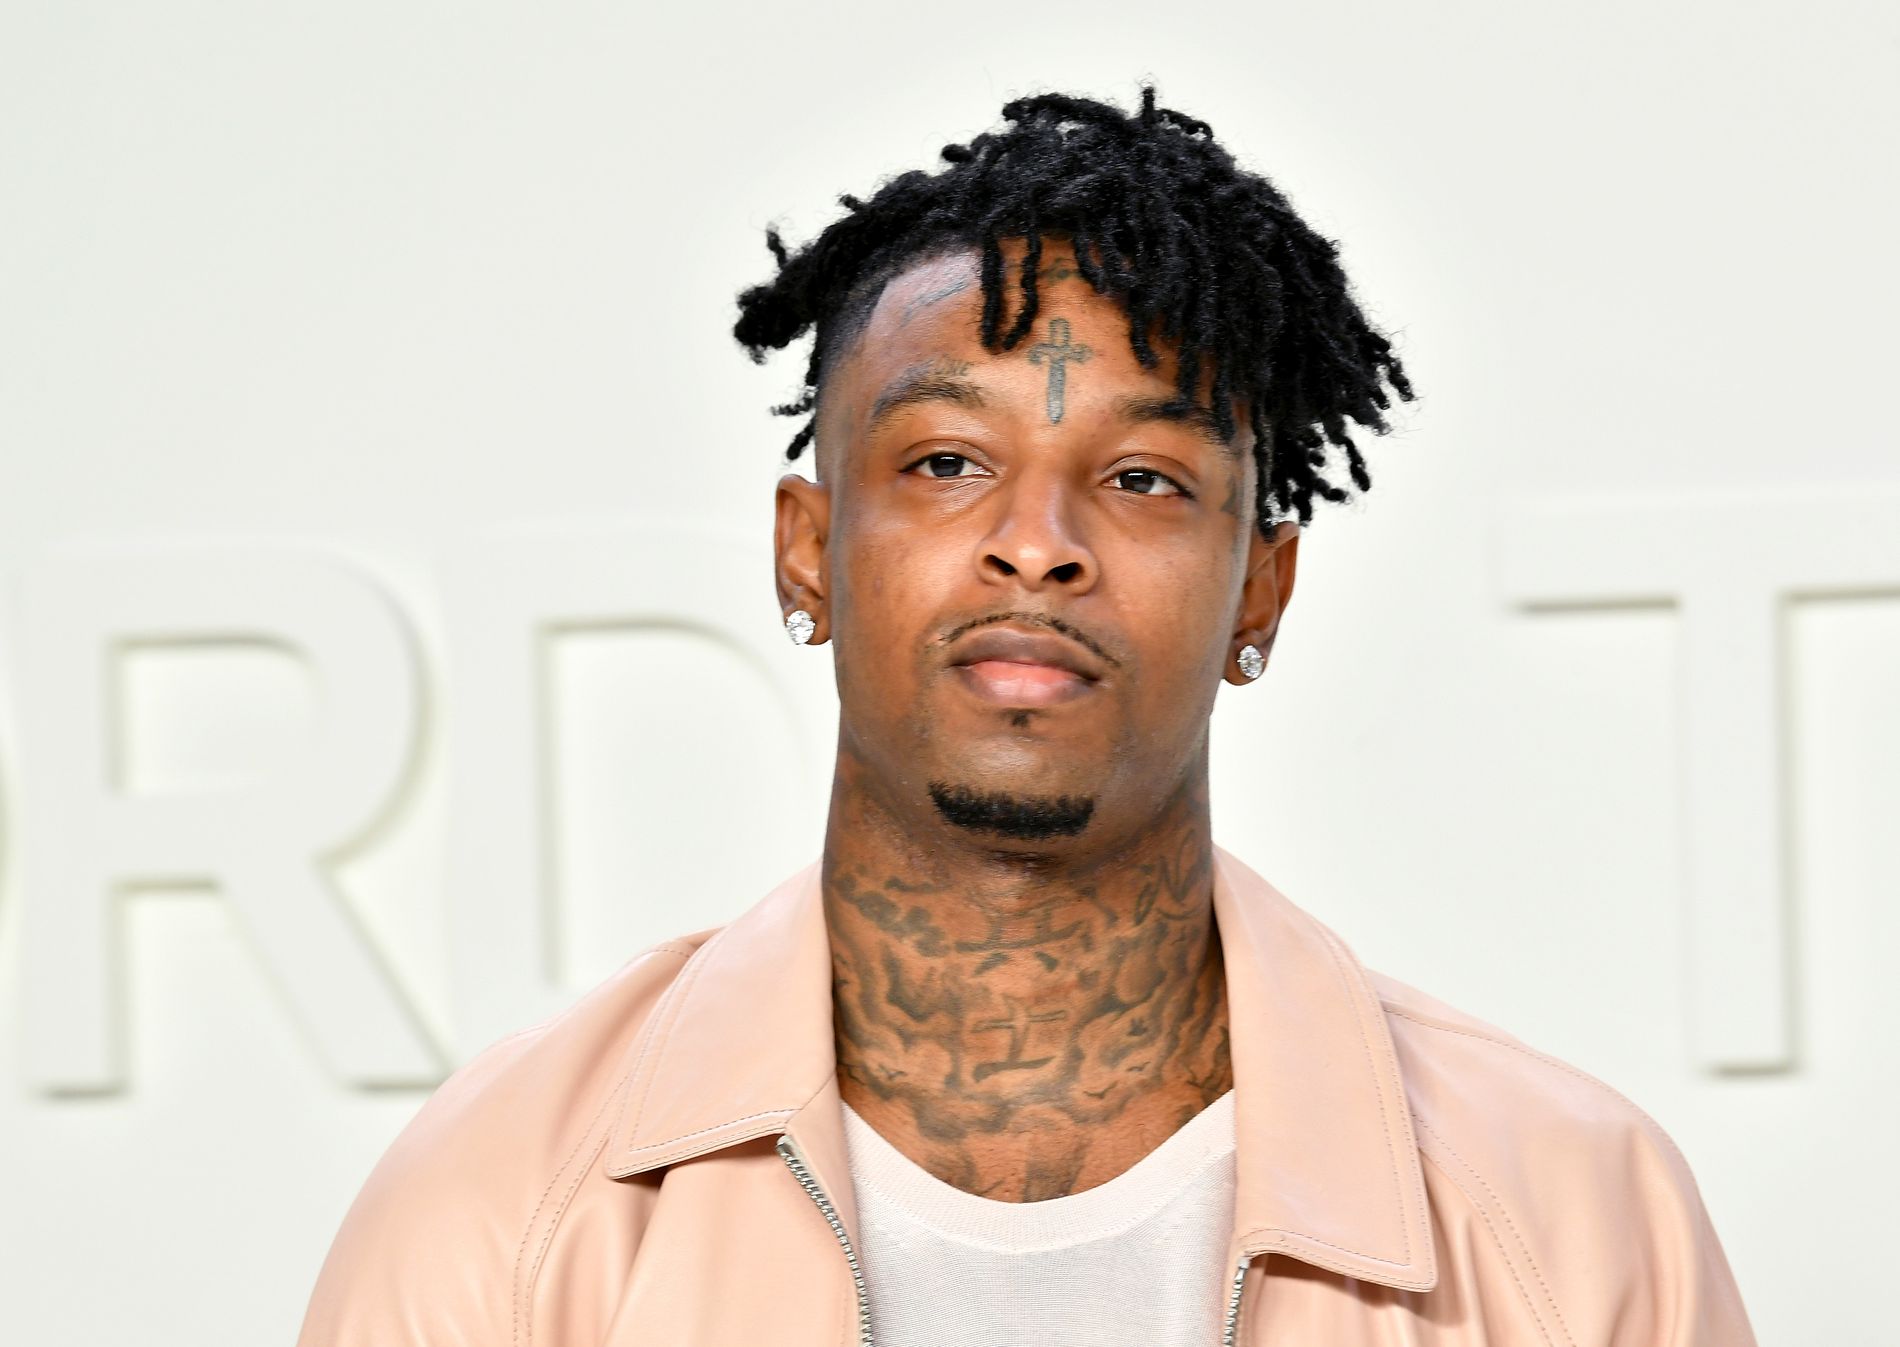 21 Savage's 'Saw'-Inspired Video for 'Spiral' Behind the Scenes